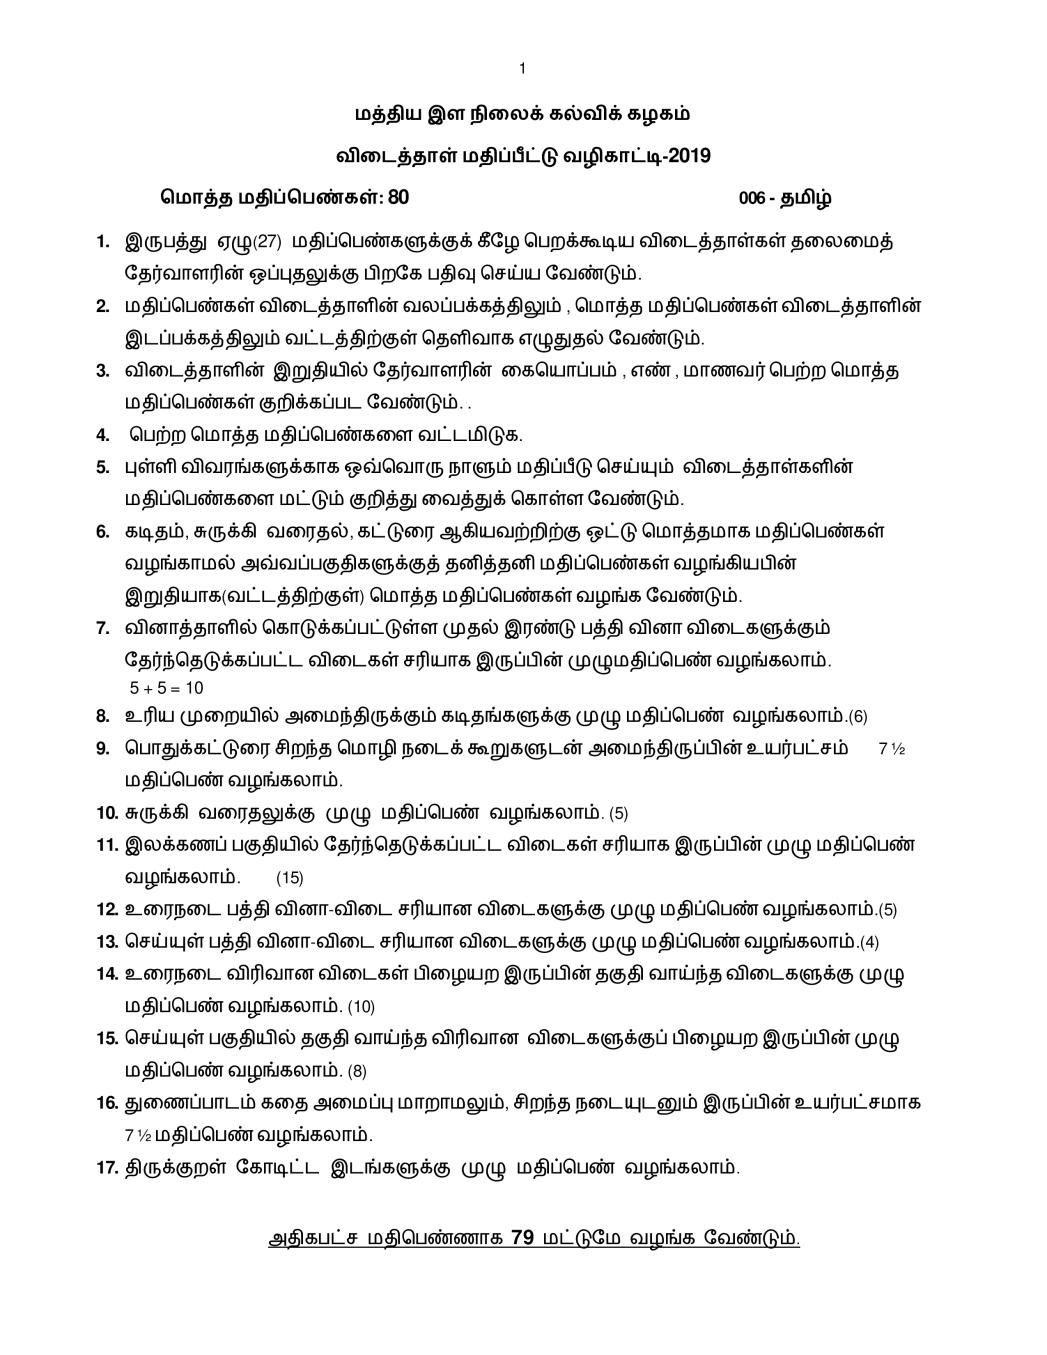 CBSE Class 10 Tamil Question Paper 2019 Solutions - Page 1